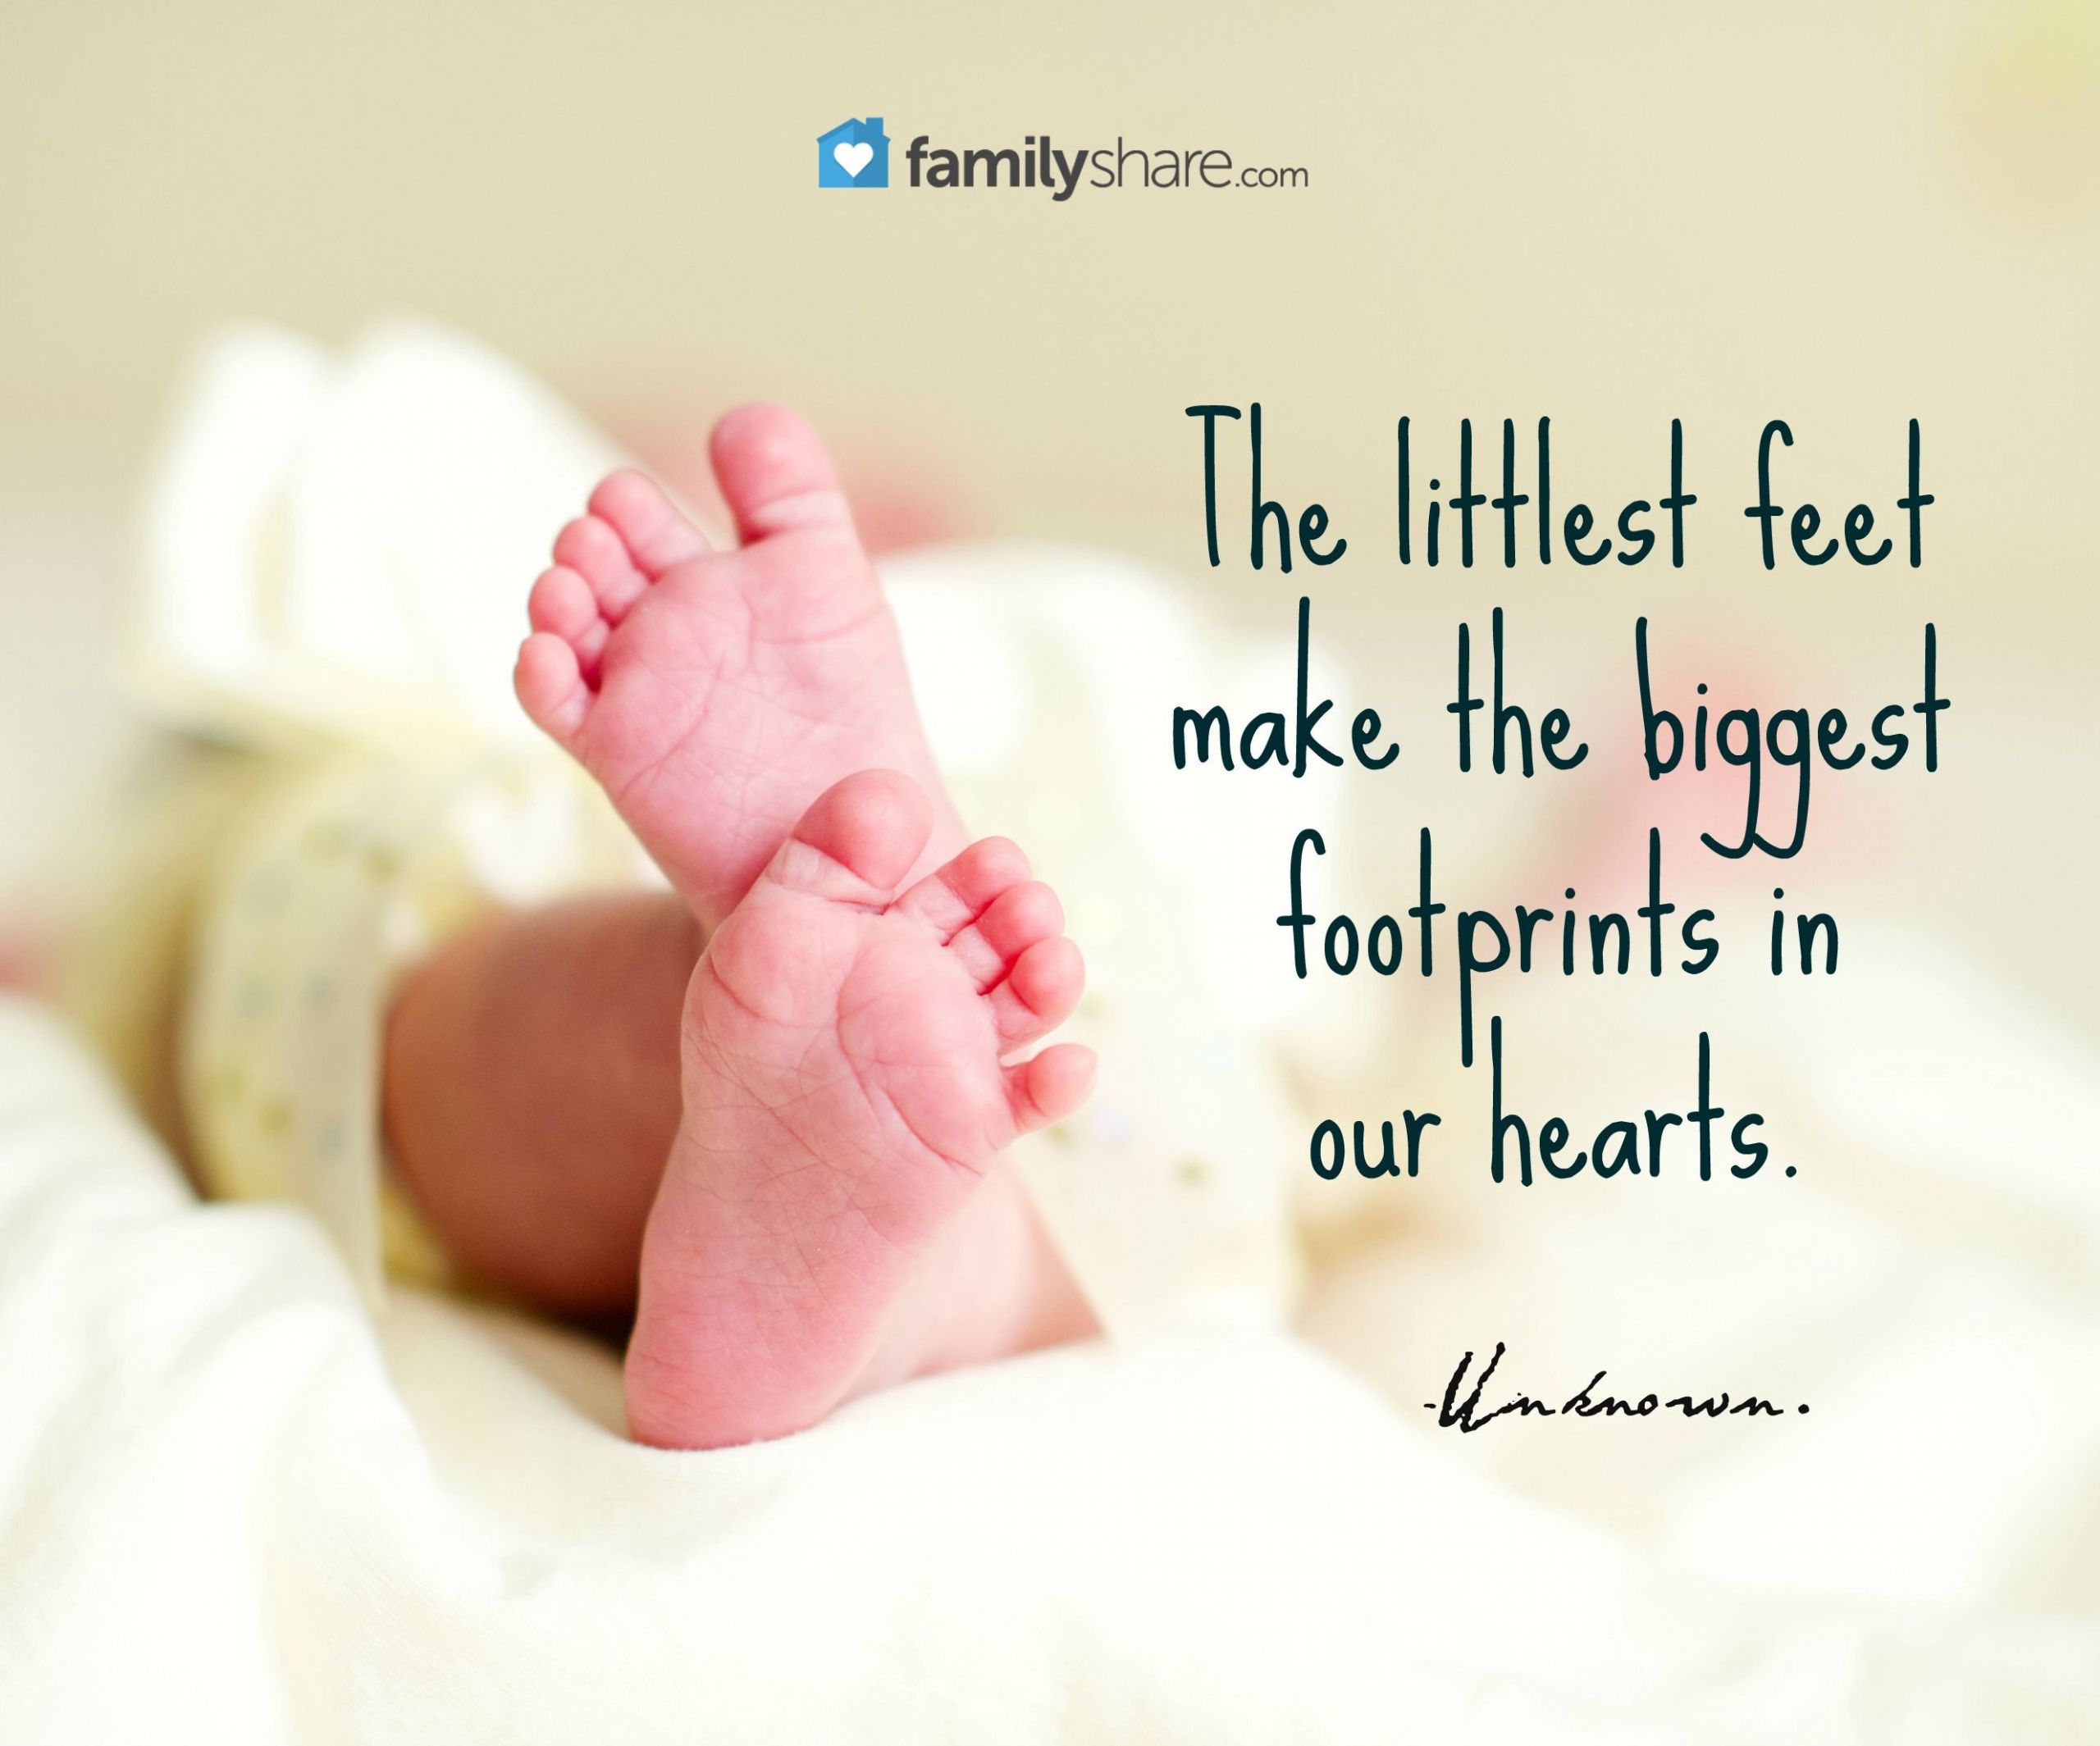 Baby Footprints Quotes
 The littlest feet make the biggest footprints in our